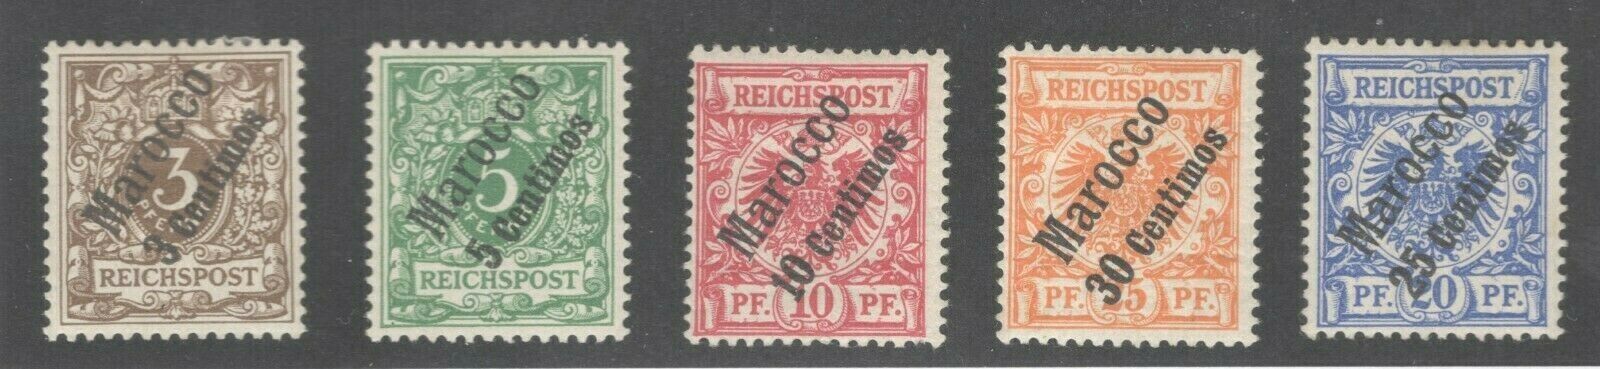 #1-5 Germany Offices In Morocco Mint Lh/hr 4-5 Handstamped   (jh 5/19/21) Gp